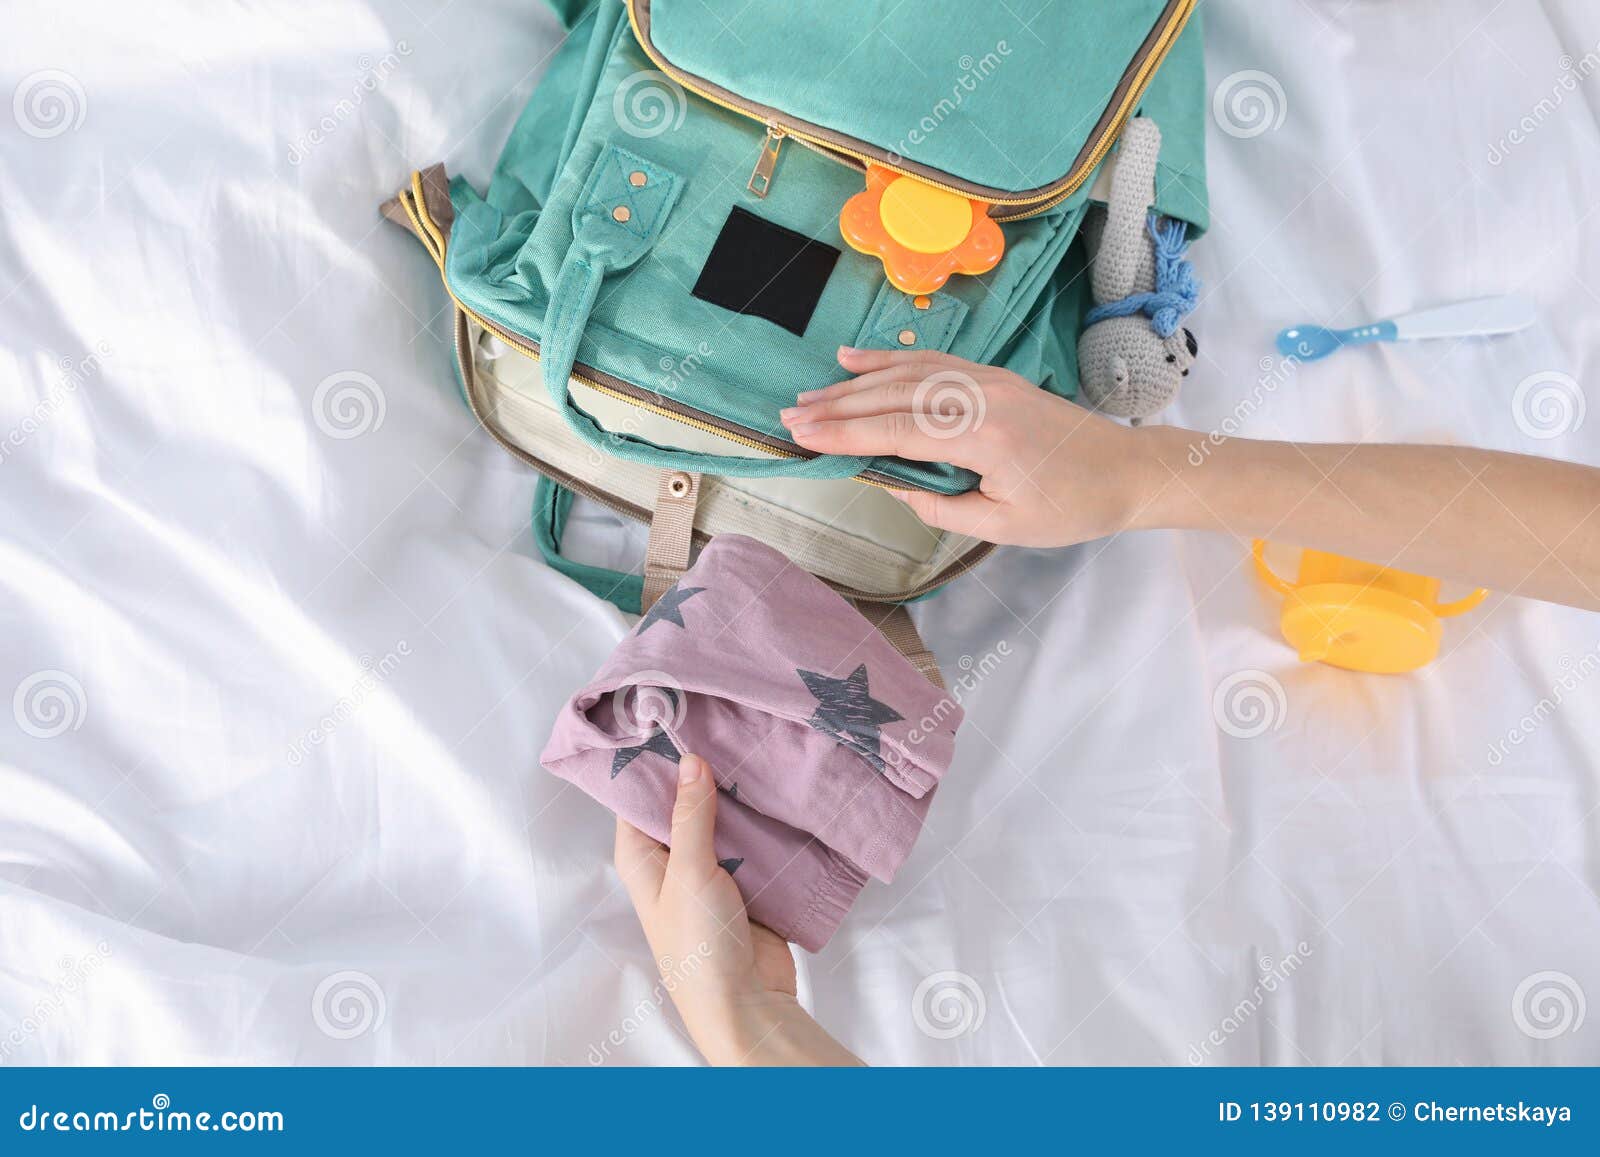 woman packing baby accessories into maternity backpack on bed